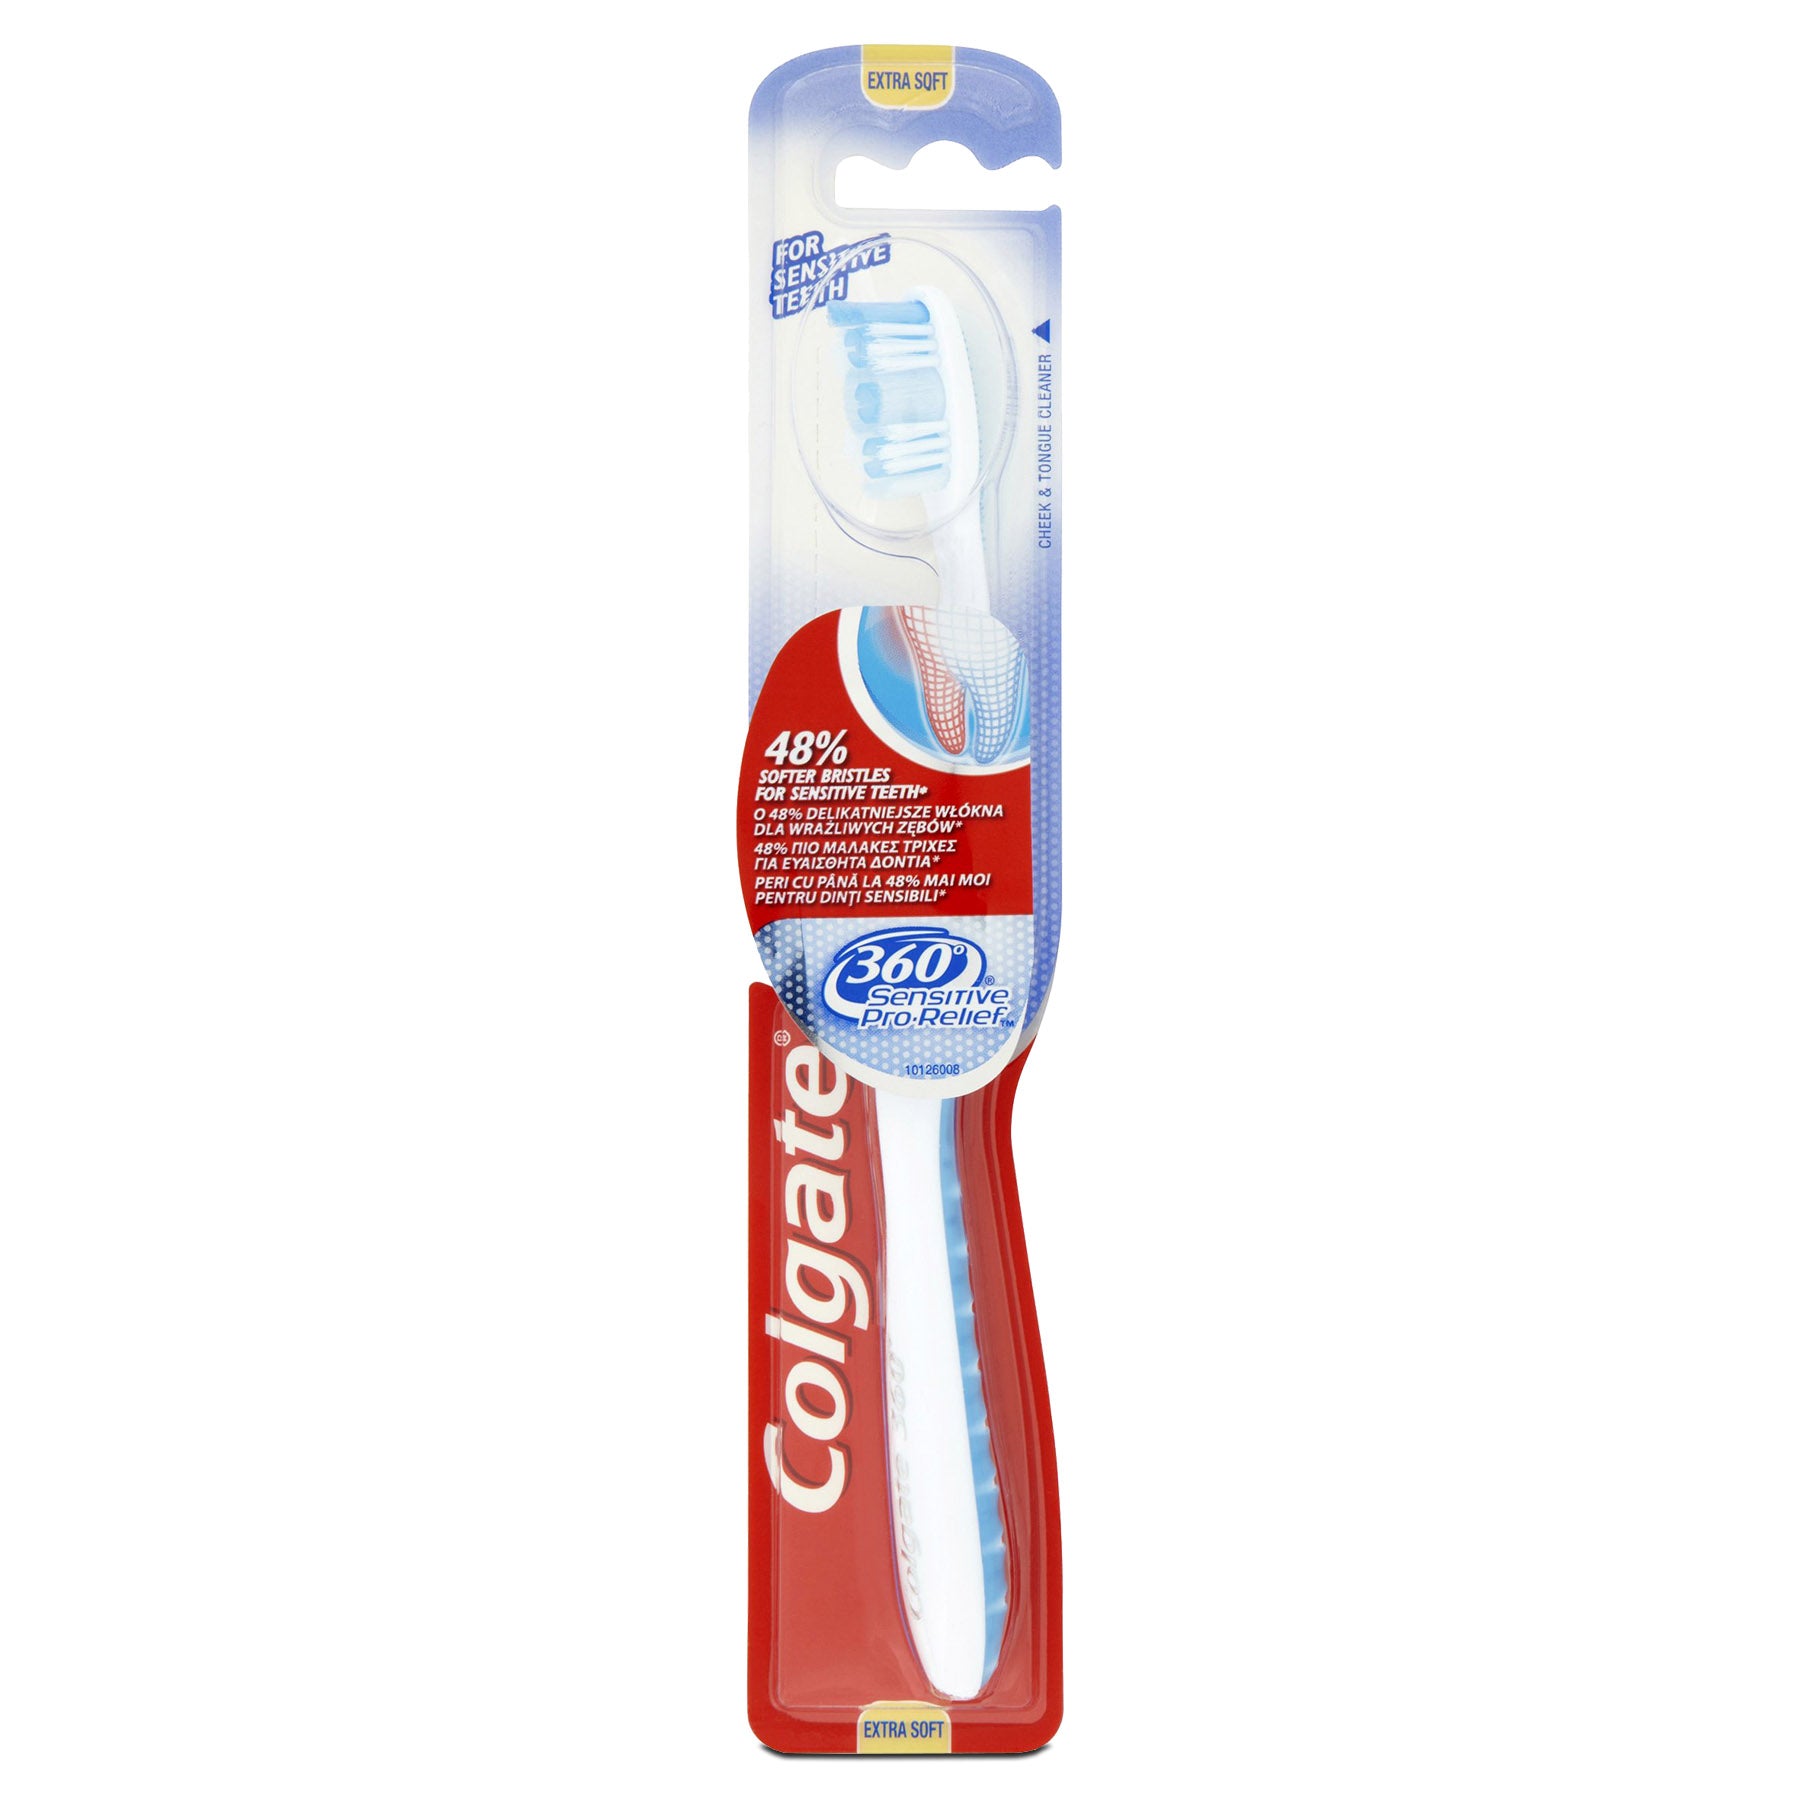 Colgate Sensitive Pro-Relief 360 Ultra Soft Toothbrush